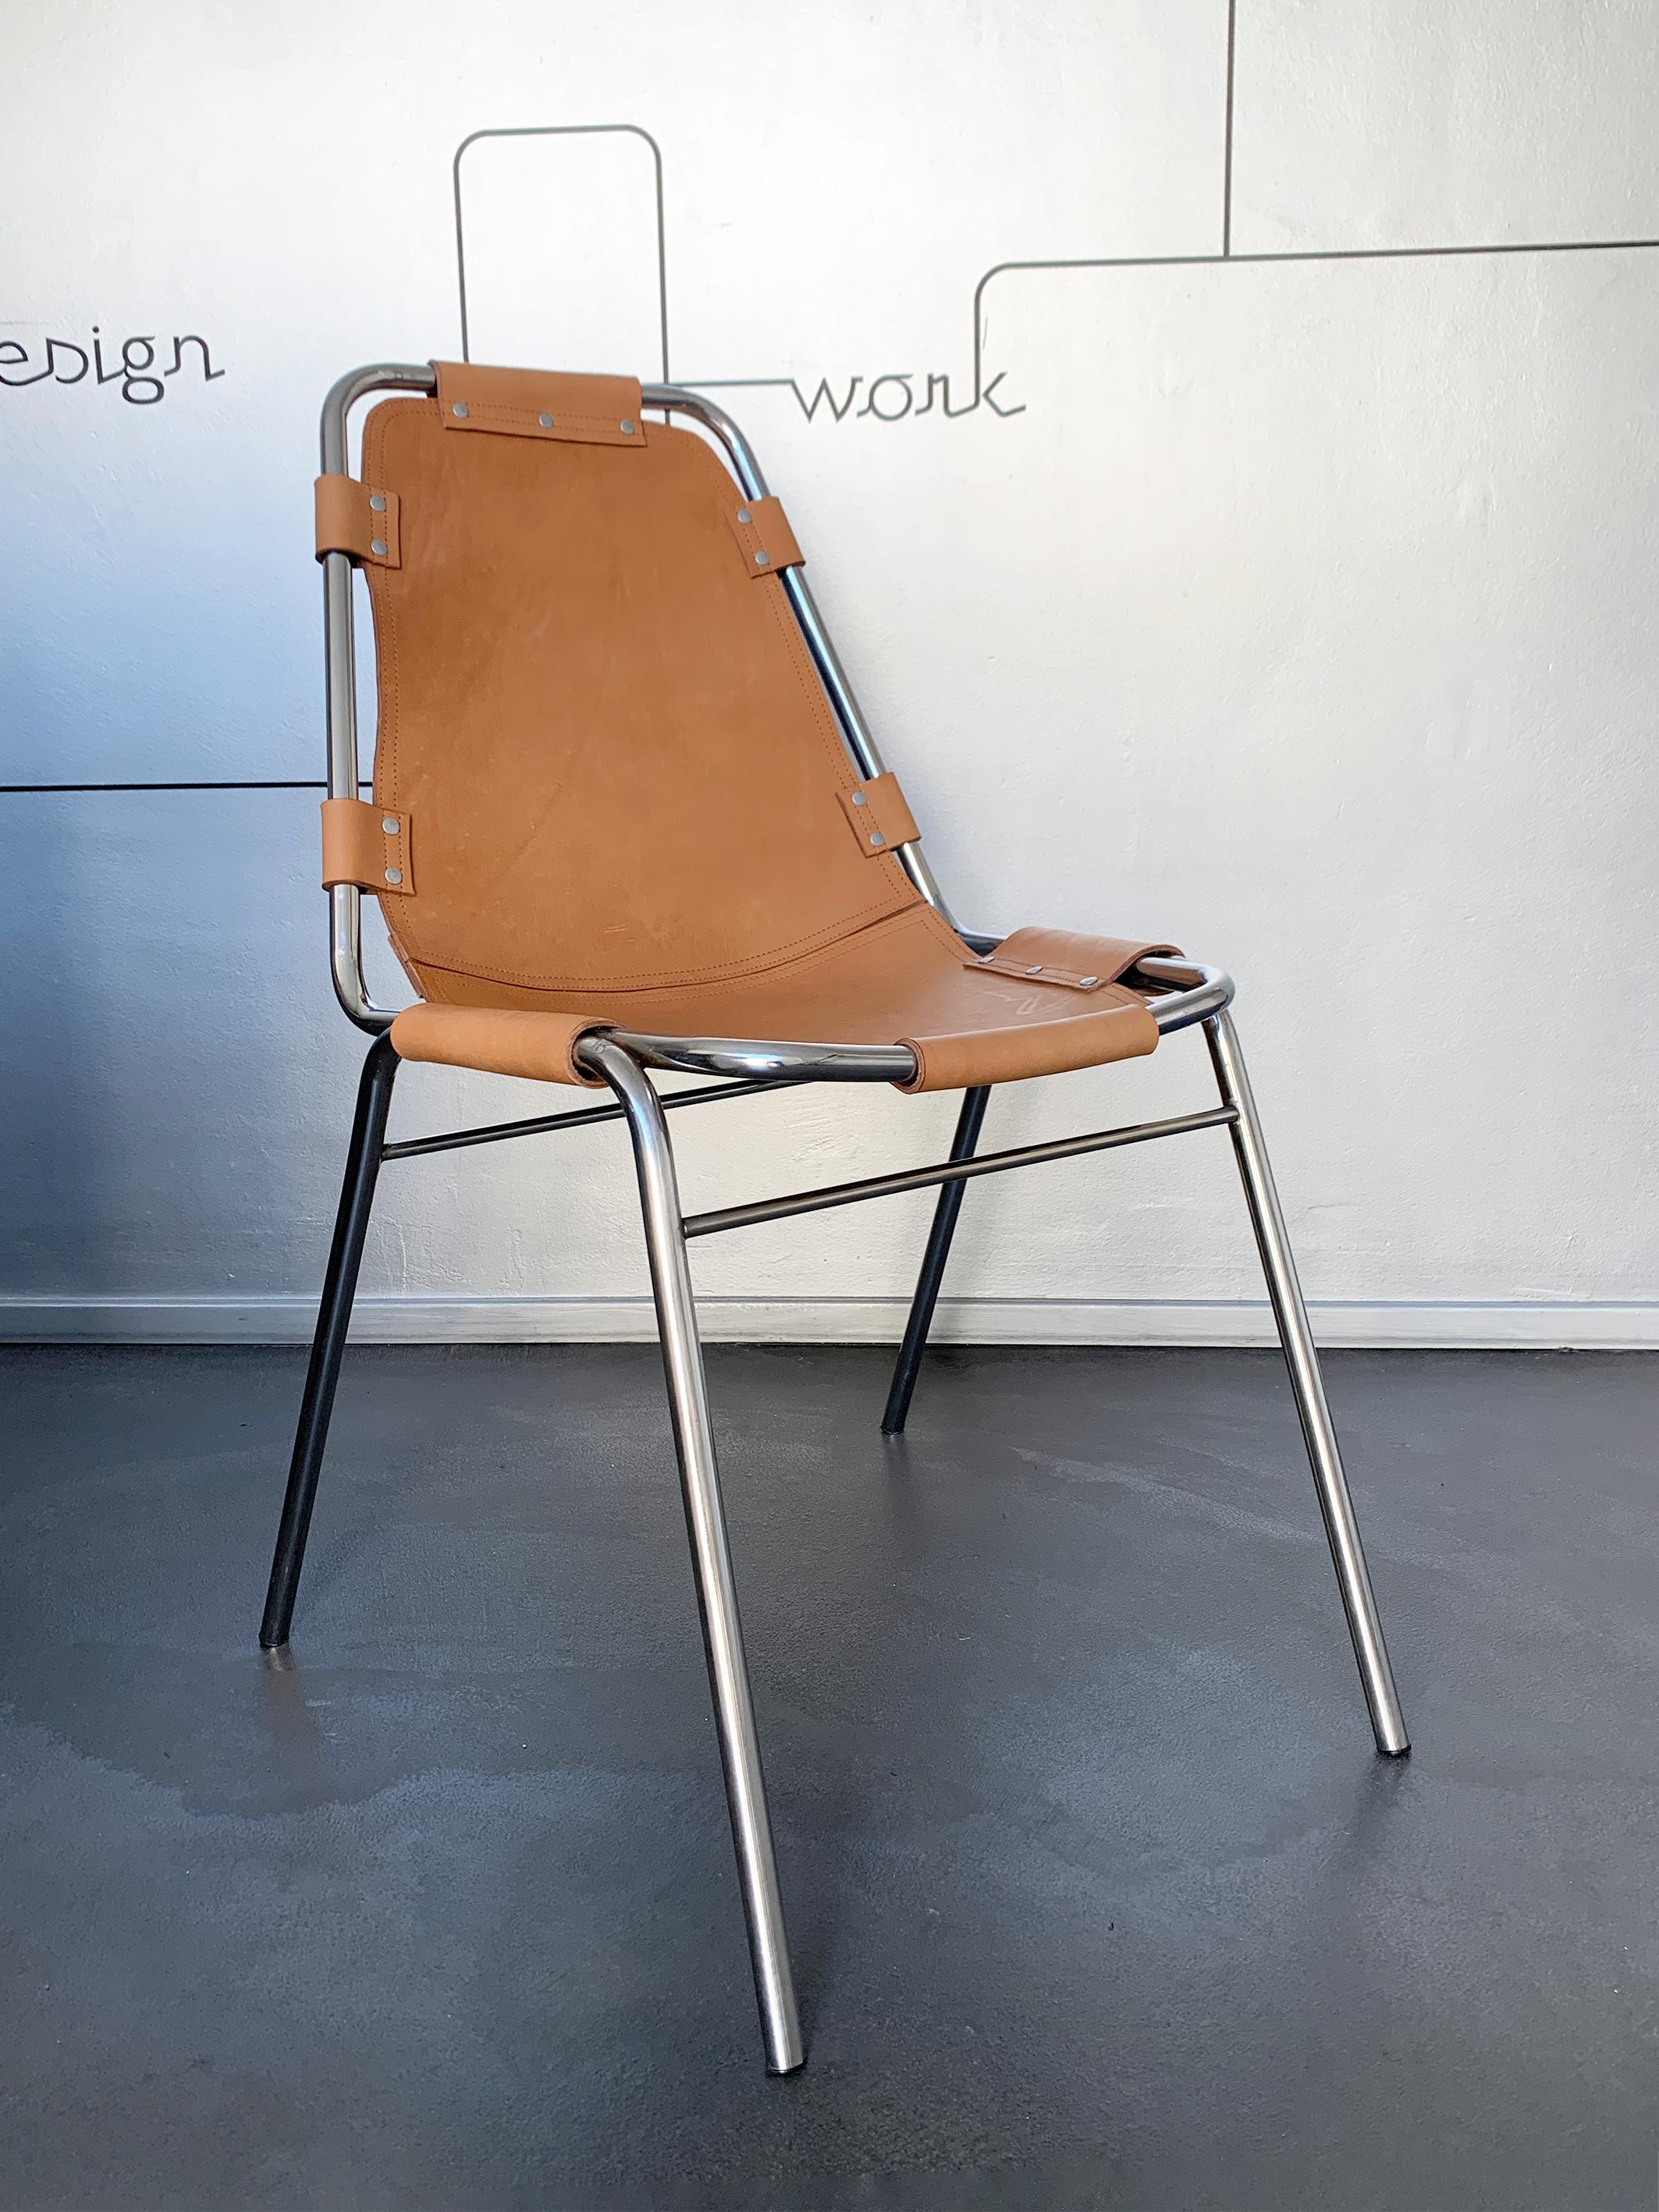 Dining chair commissioned / selected by Charlotte Perriand for the interior design of the appartements of 'Les Arcs' Ski Resorts in the French Alps.

Chromed tubular frame in metal with thick brown leather seat.

New handmade leather seat,